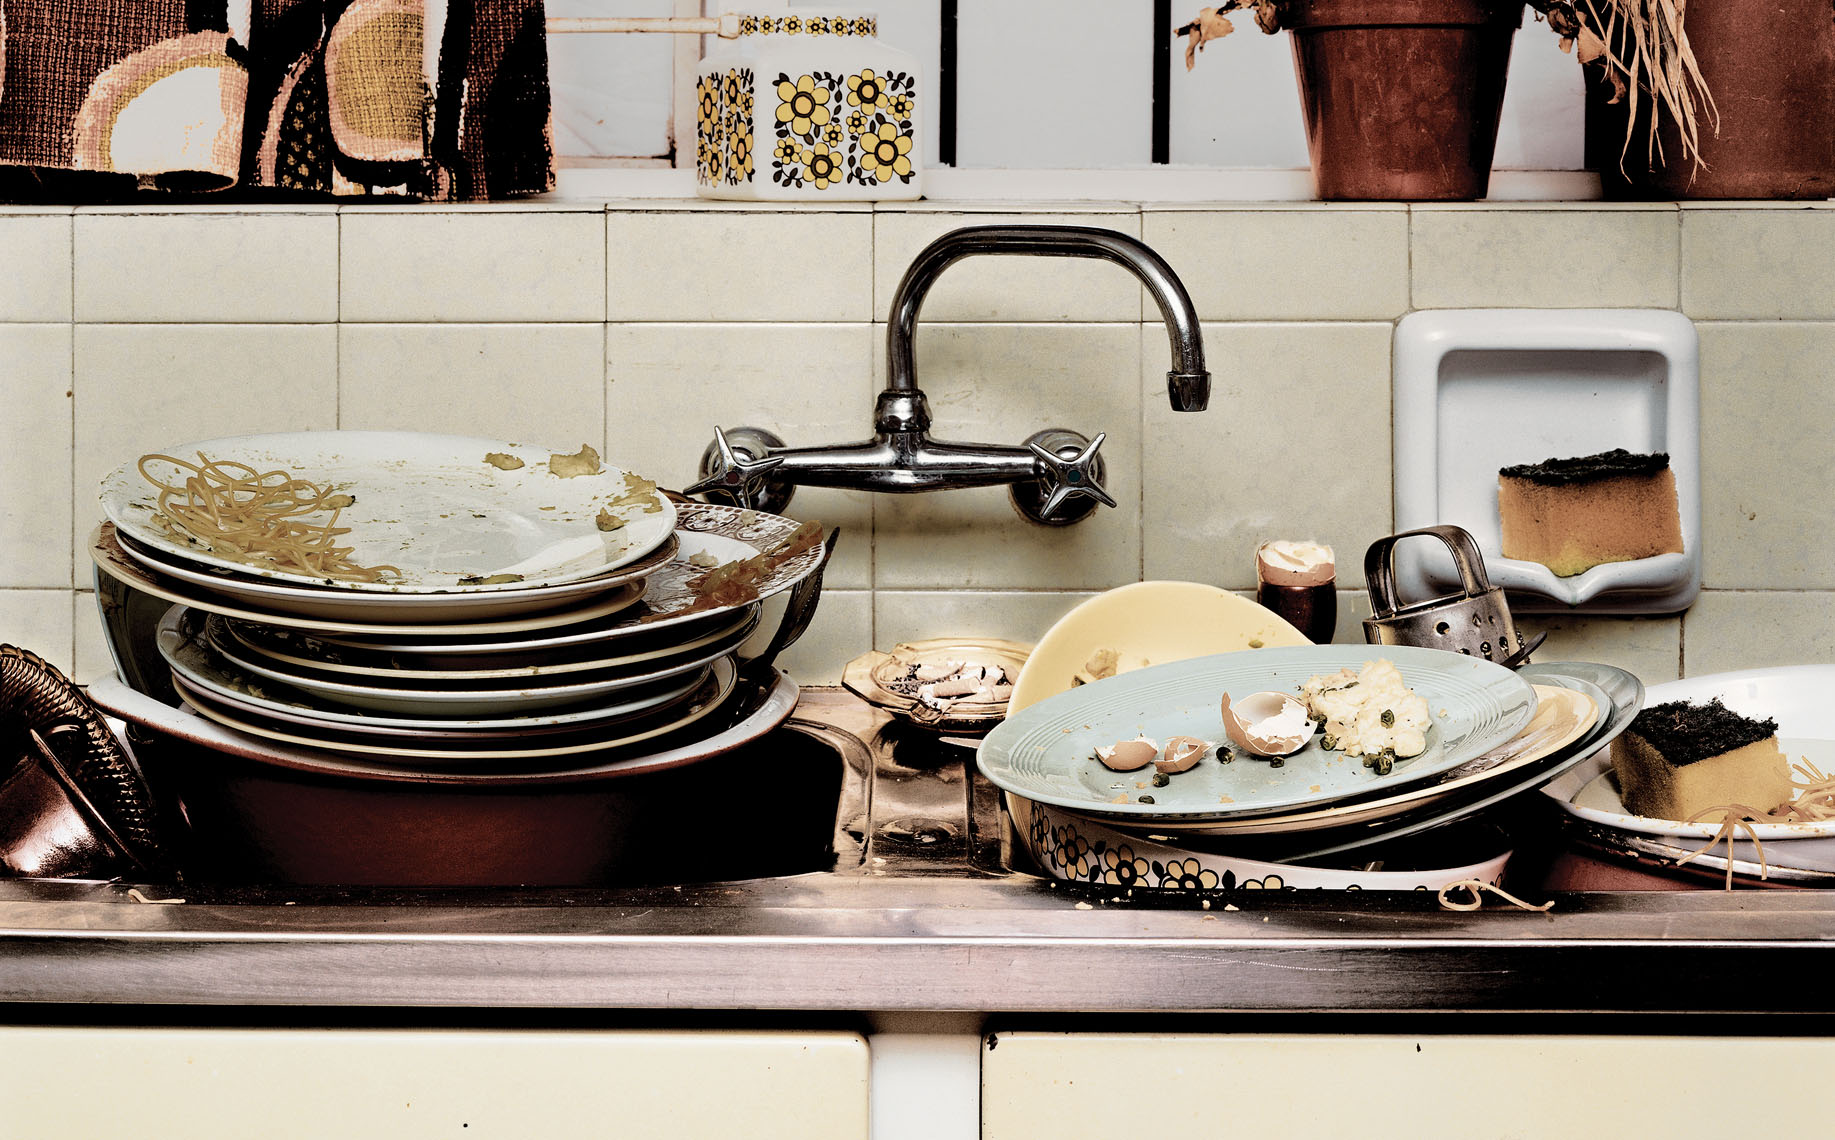 A kitchen sink loaded with dirty dishes. 